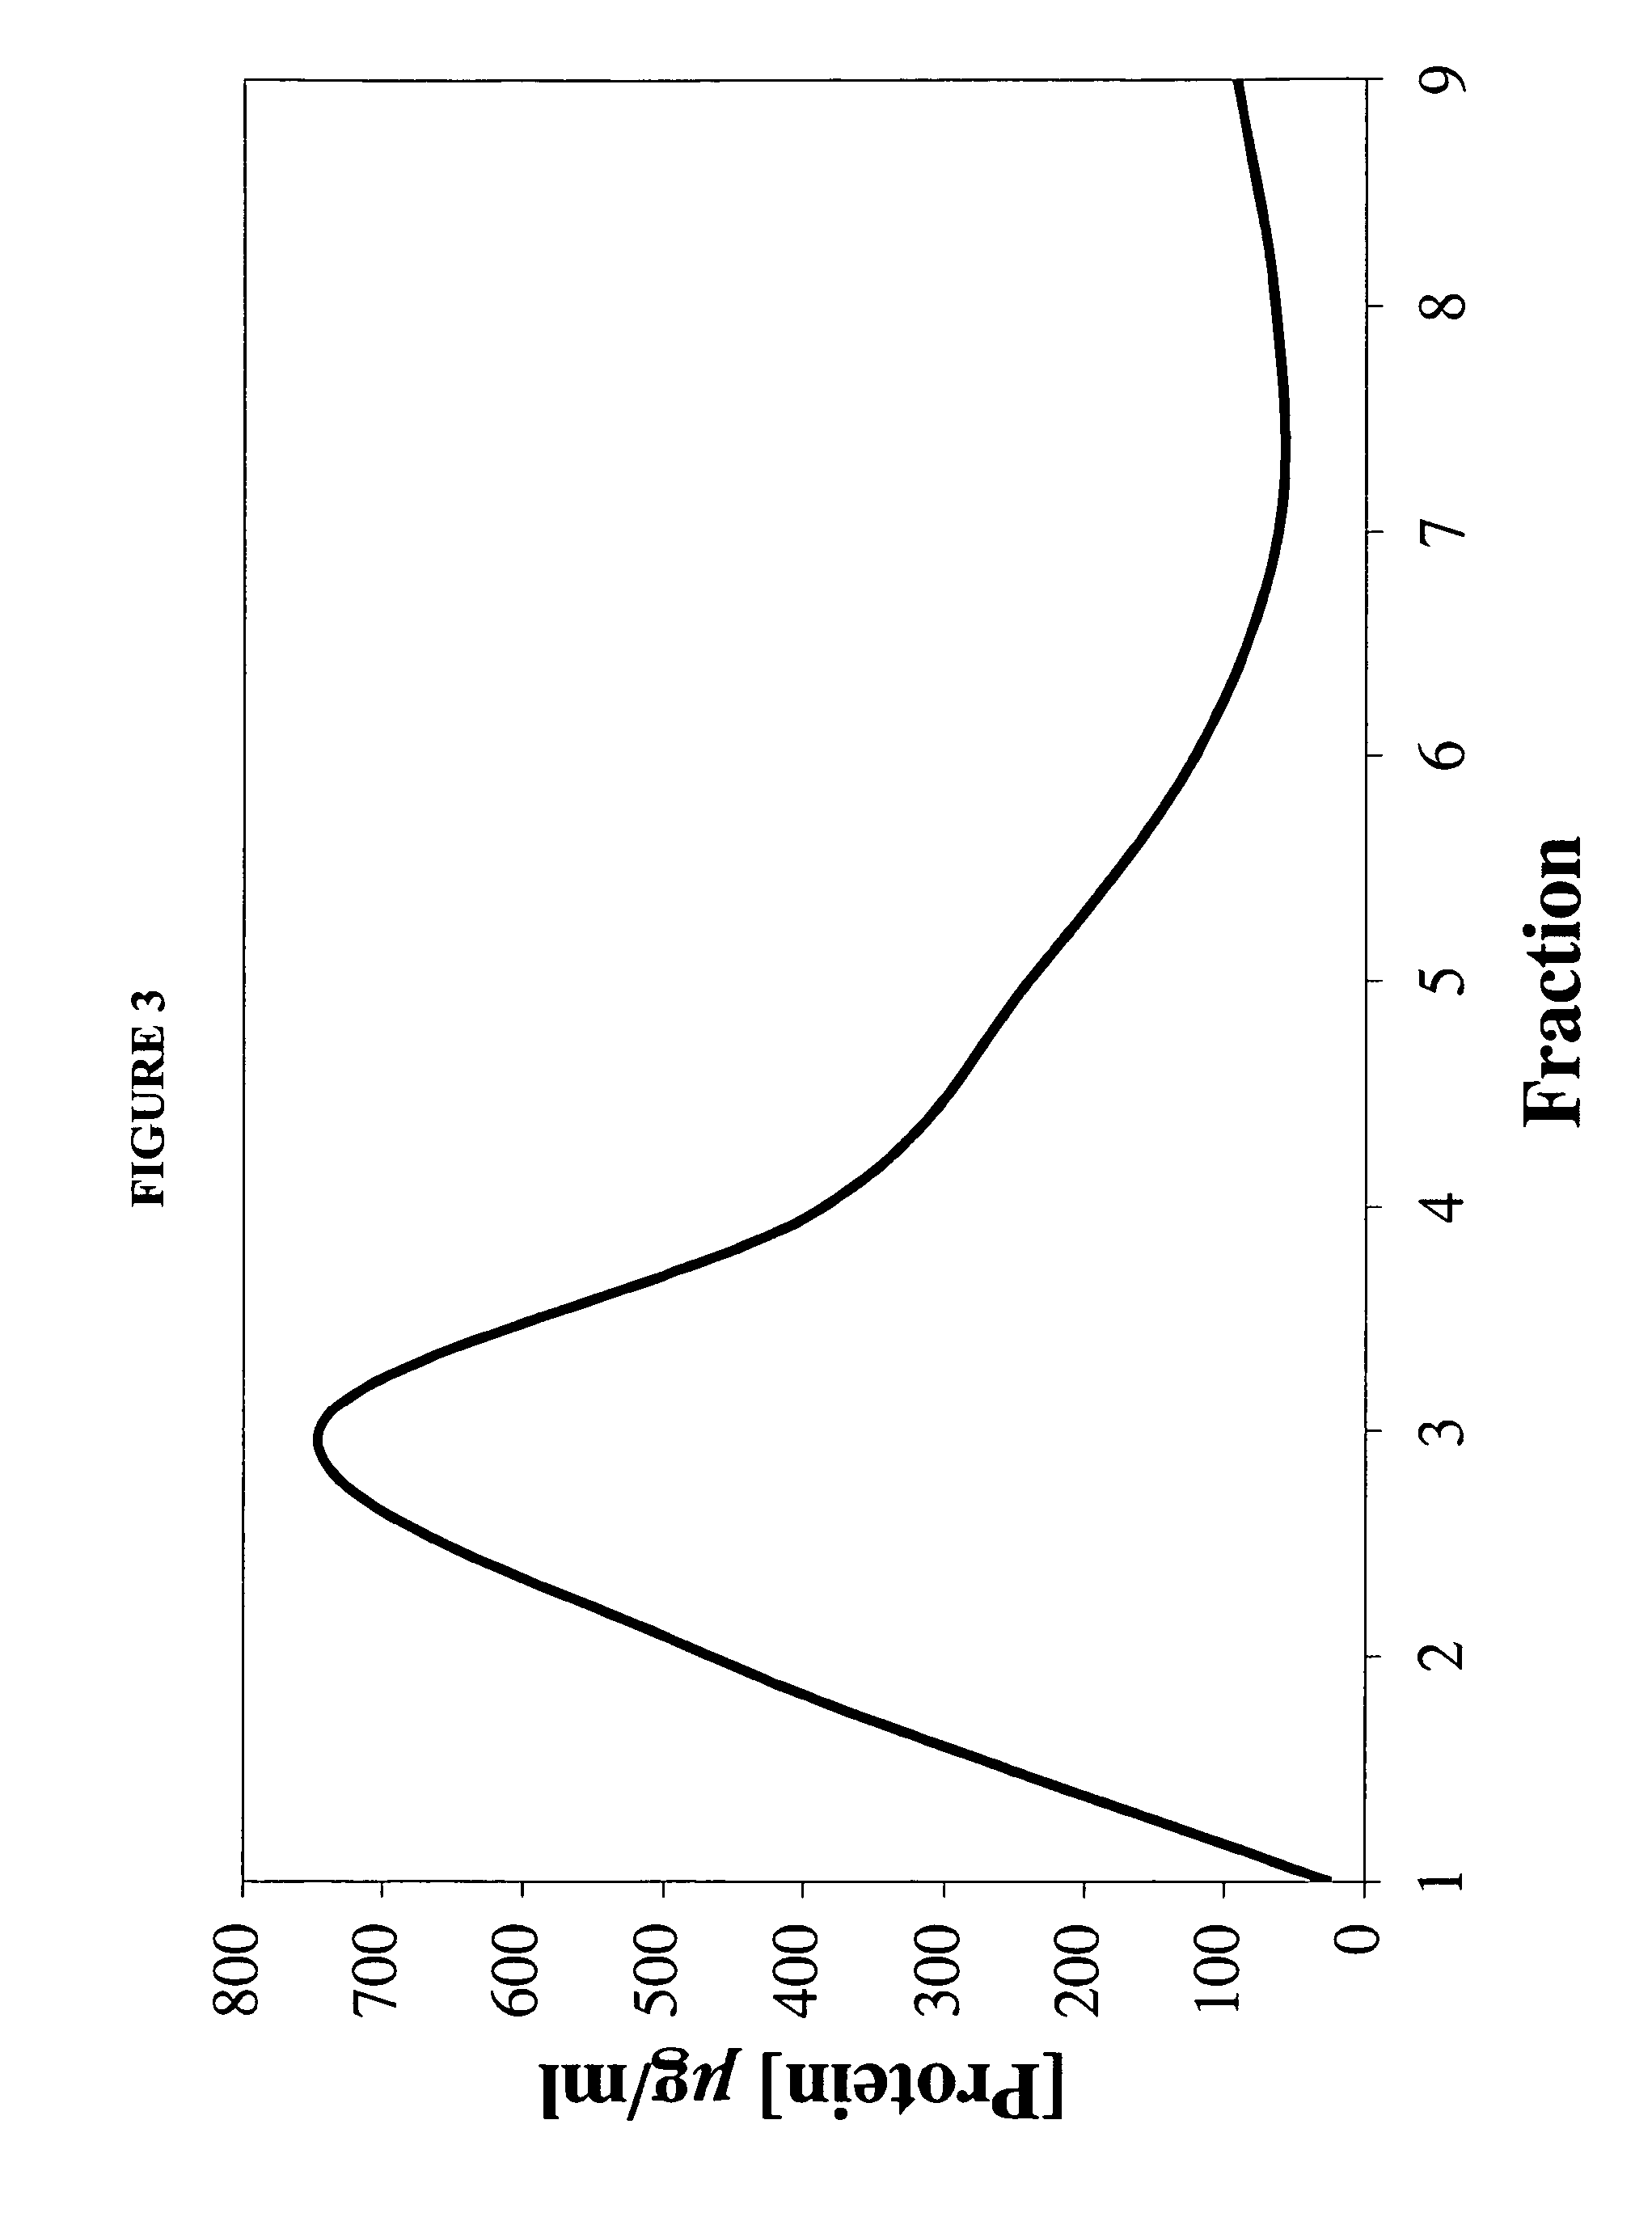 Lipophilic drug delivery vehicle and methods of use thereof